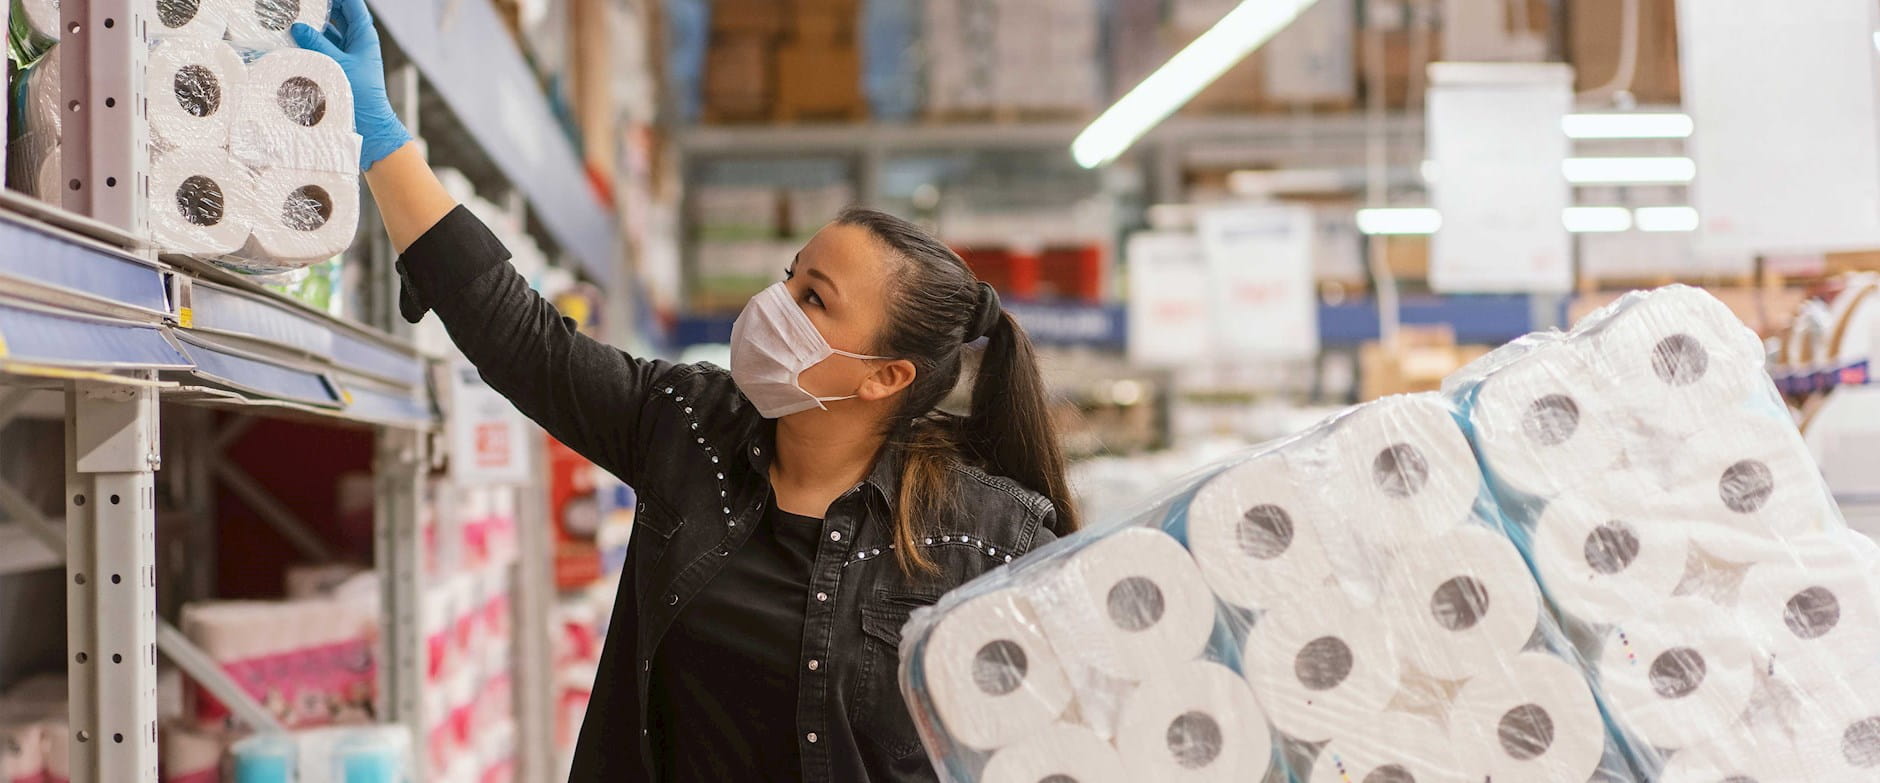 A woman buying toilet paper at a warehouse store